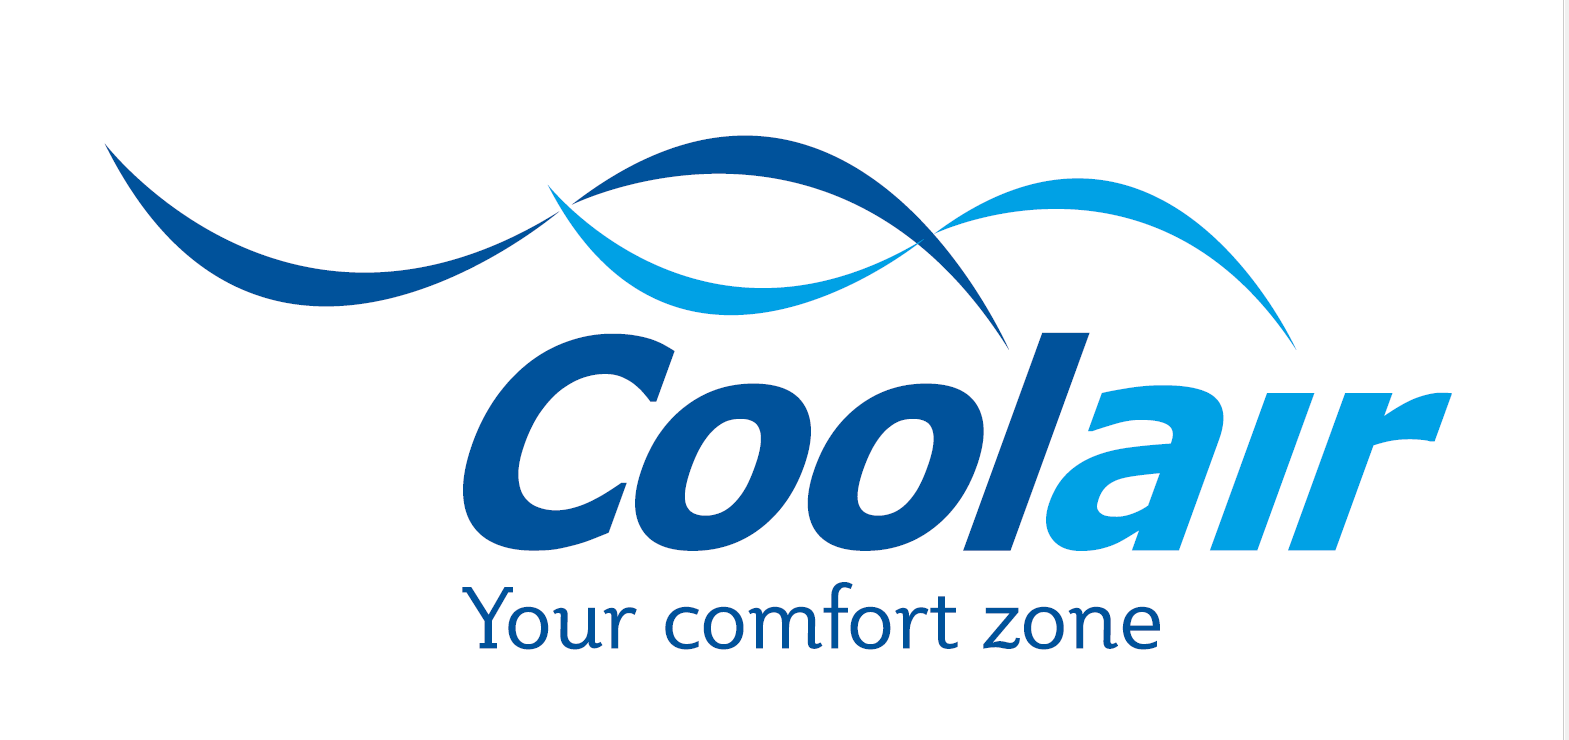 Coolair launch Legal challenge to protect Reputation